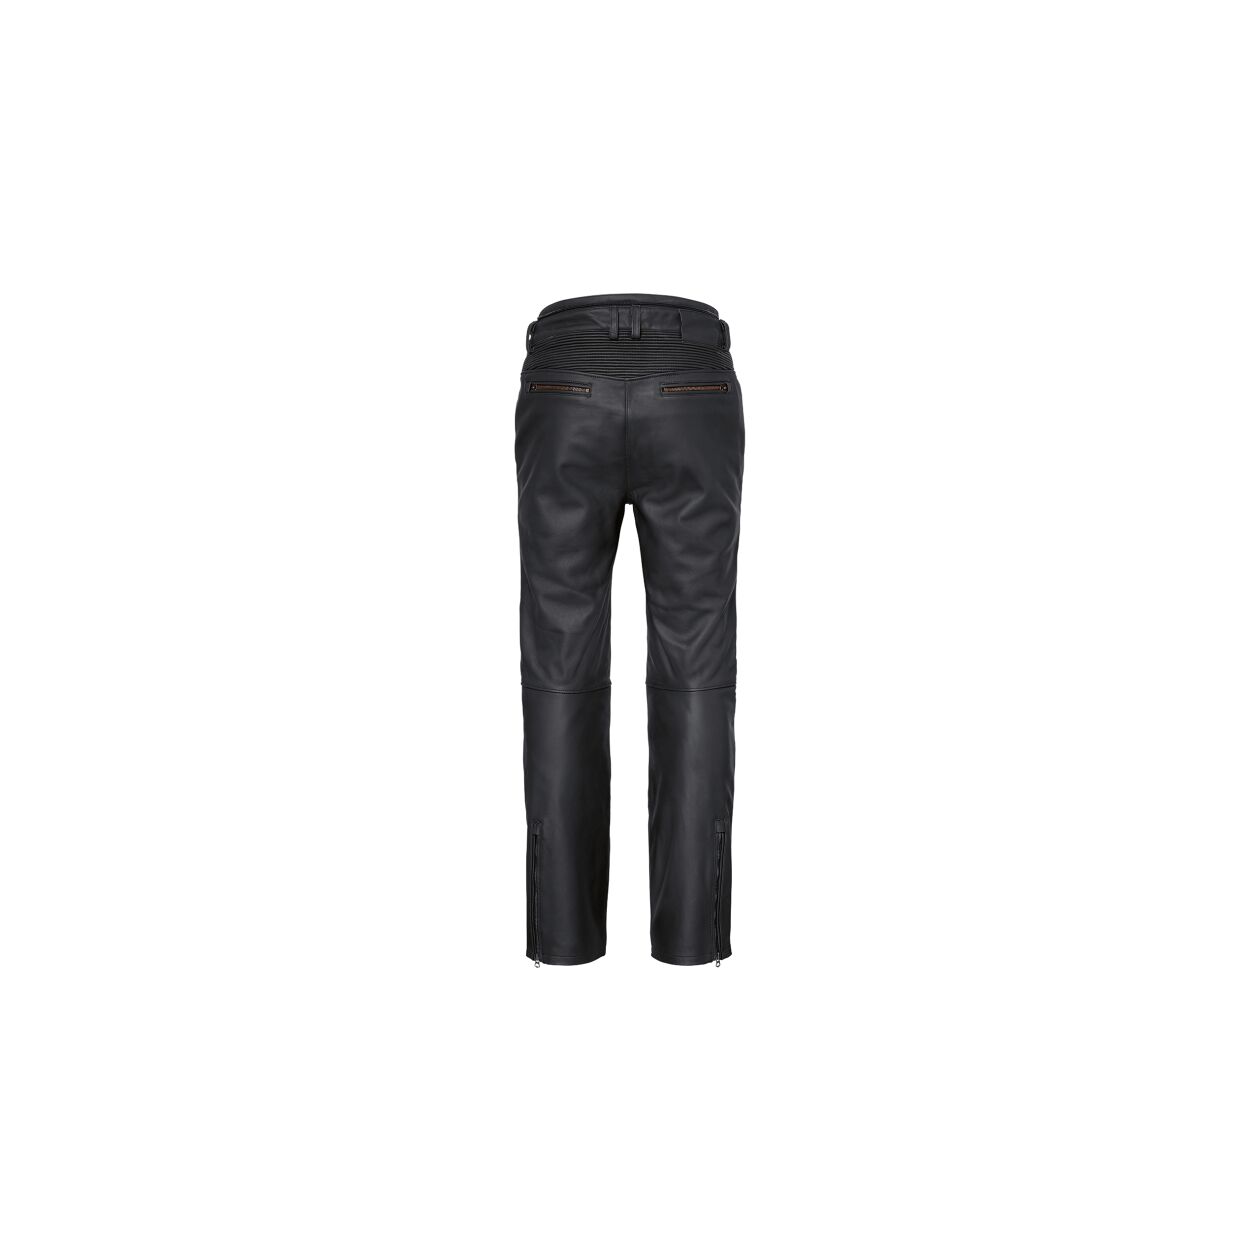 Designer Blue And Black Motorbike Leather Trousers